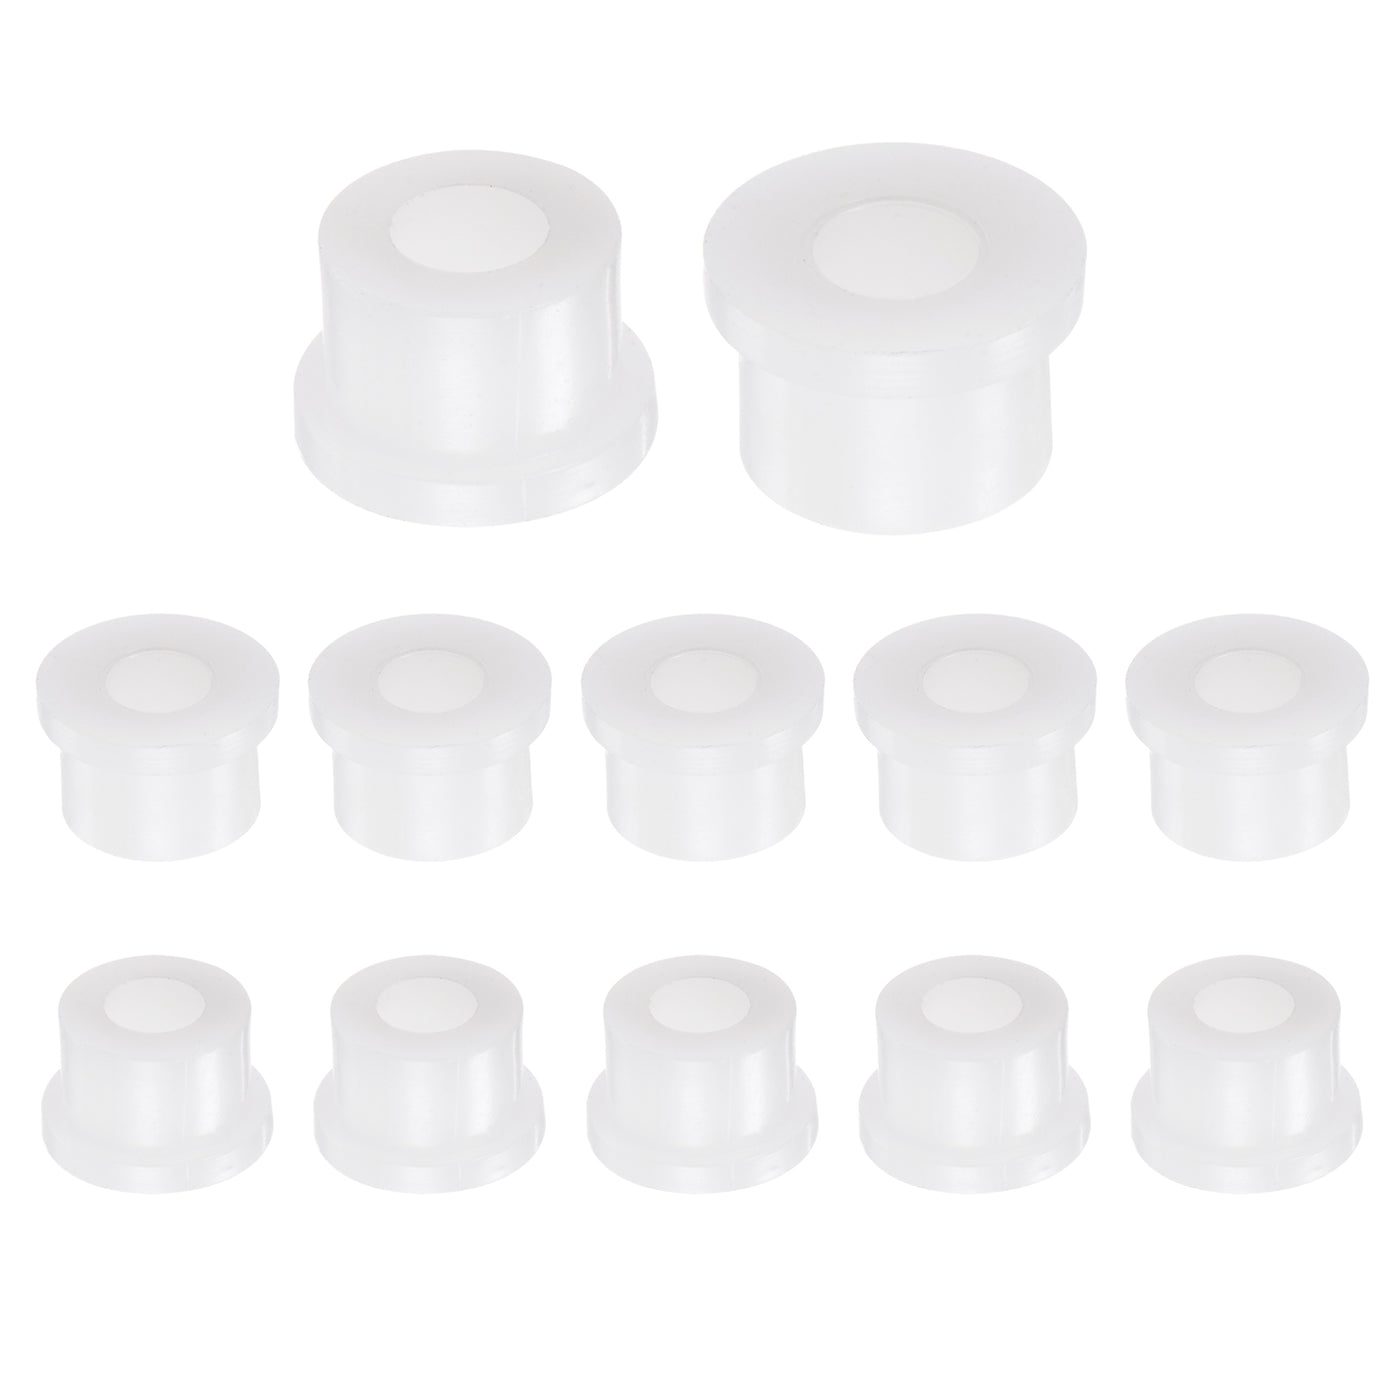 uxcell Uxcell 12pcs Flanged Sleeve Bearings 6mm ID 11.6mm OD 9mm Length Nylon Bushings, White